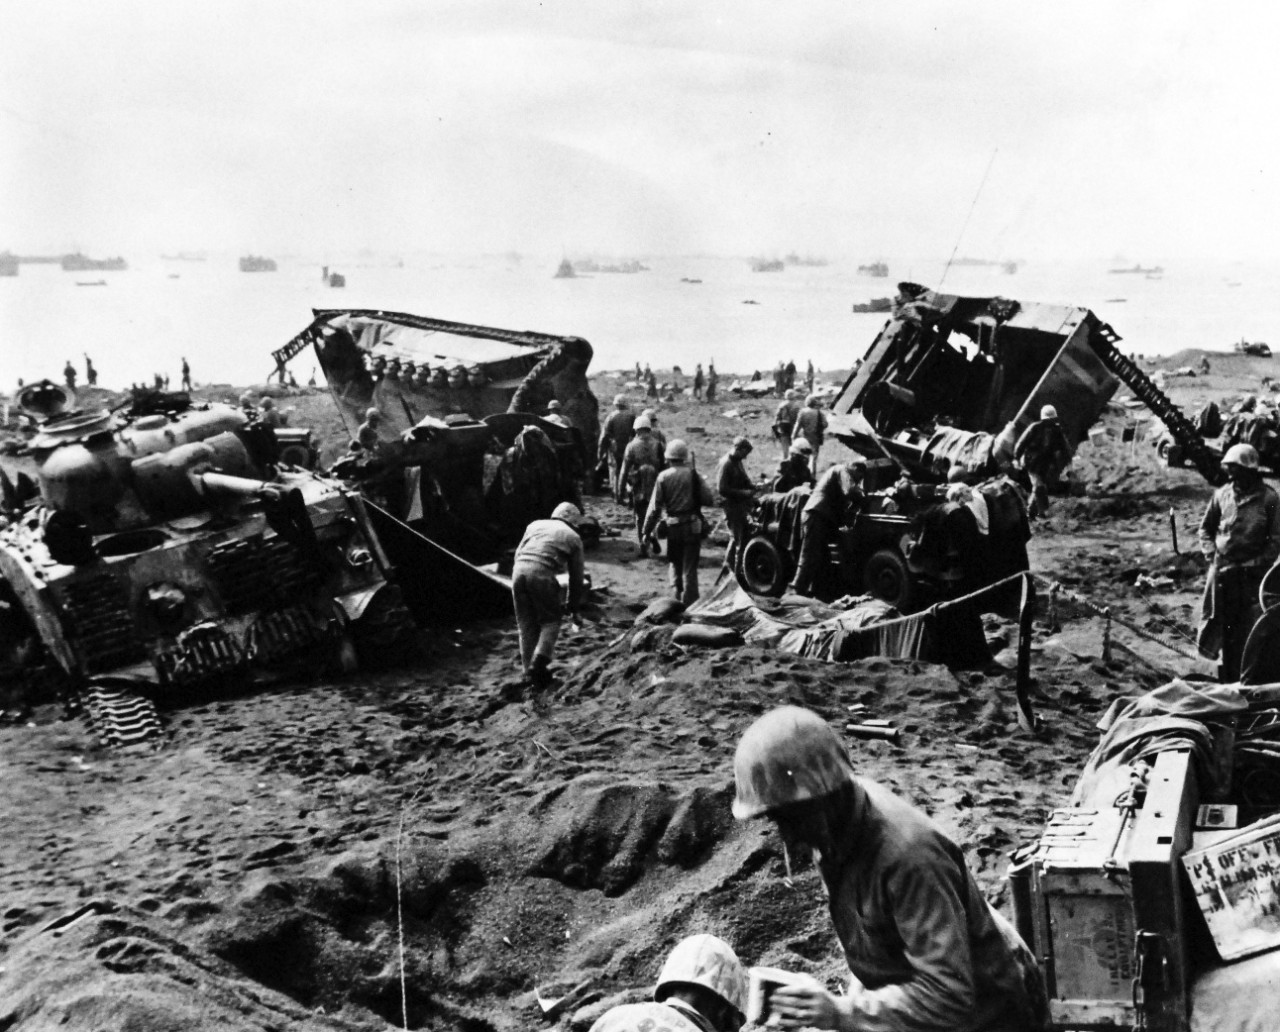 80-G-304850:  Battle for Iwo Jima, February 19, 1945.  Stalled and wrecked vehicles of Marines bagged down in soft Volcanic ash on beach of Iwo Jima were targets for Japanese mortermen who fired down from mountain overlooking beach D-Day.  Amtracs and medium tanks of Blue Beach #1.  Some of the 800 ships that took part in the action are in the background.  Photographed February 19, 1945.  U.S. Navy Photograph now in the collections of the National Archives.  (2016/01/19).